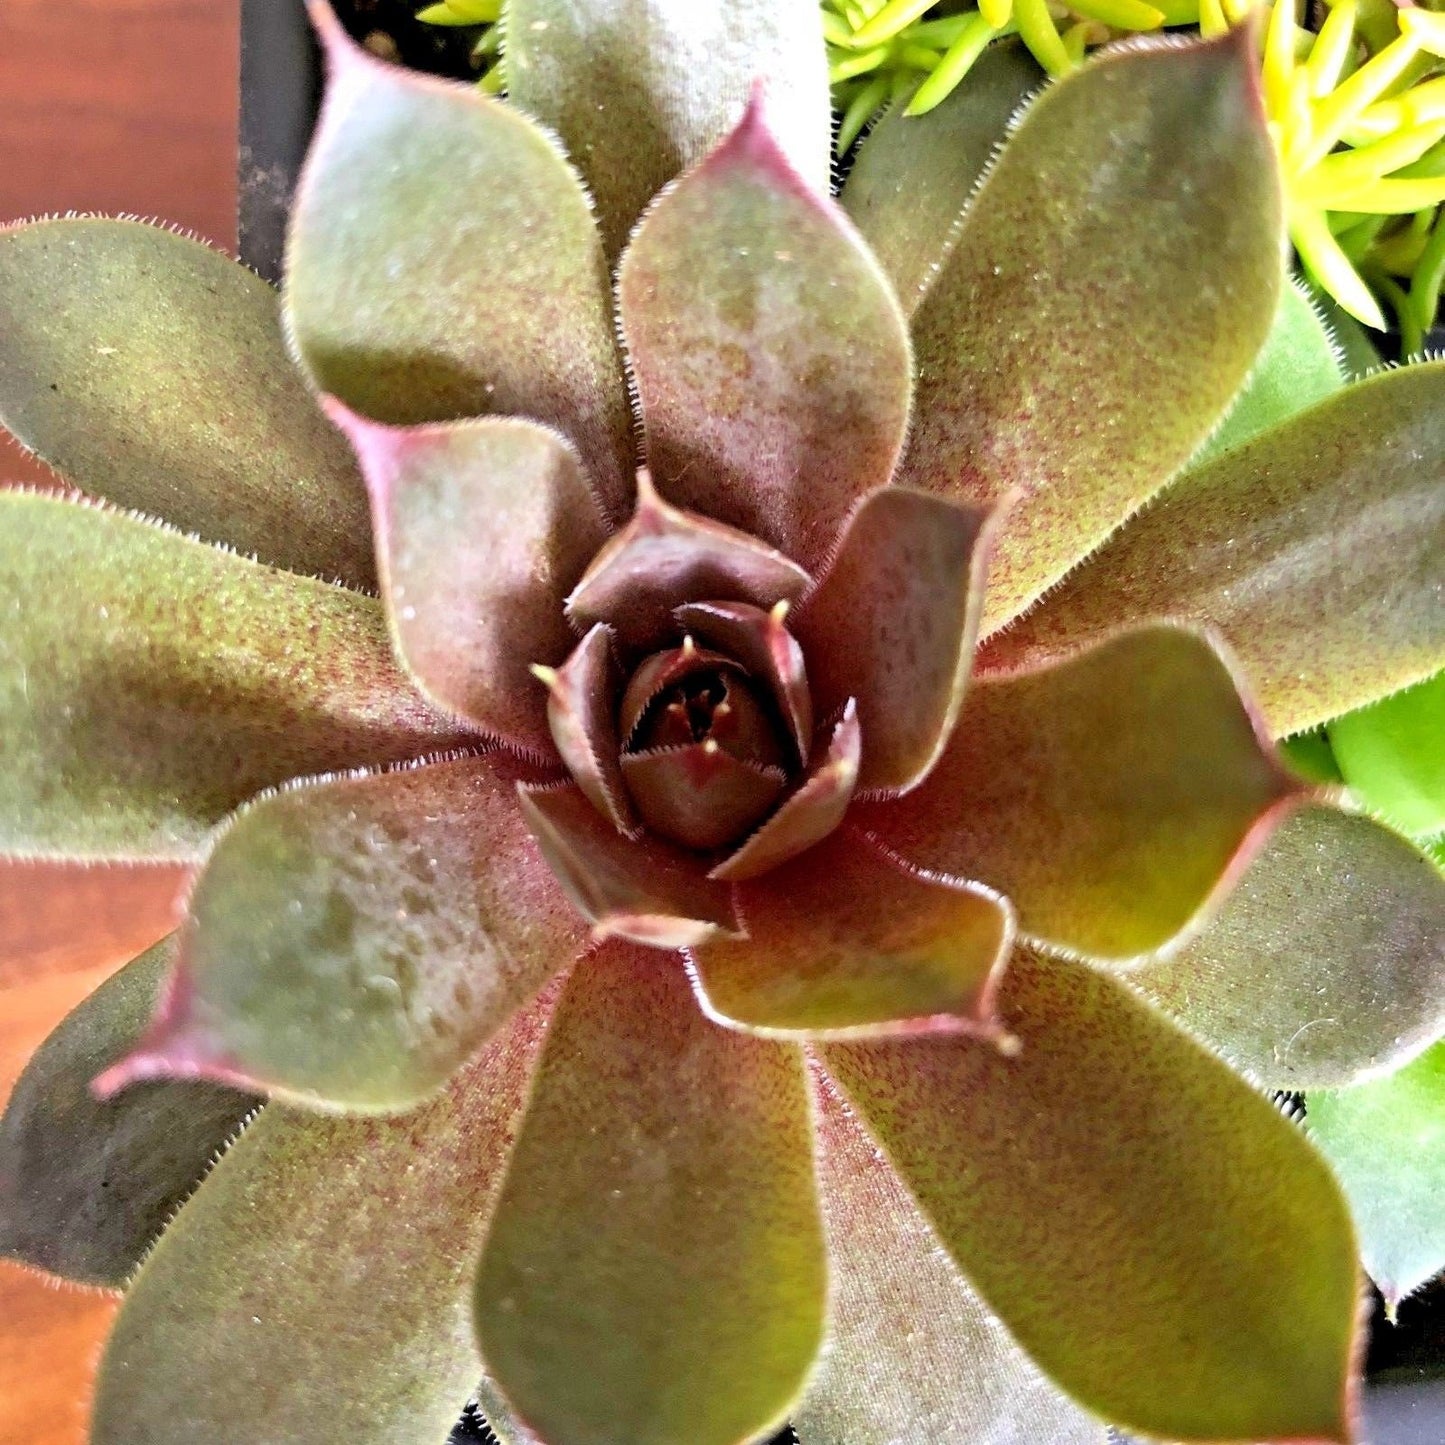 Live Succulent Variety 4 Pack of Randomly Chosen Low Maintenance 2" Plants for Home, Office or Garden